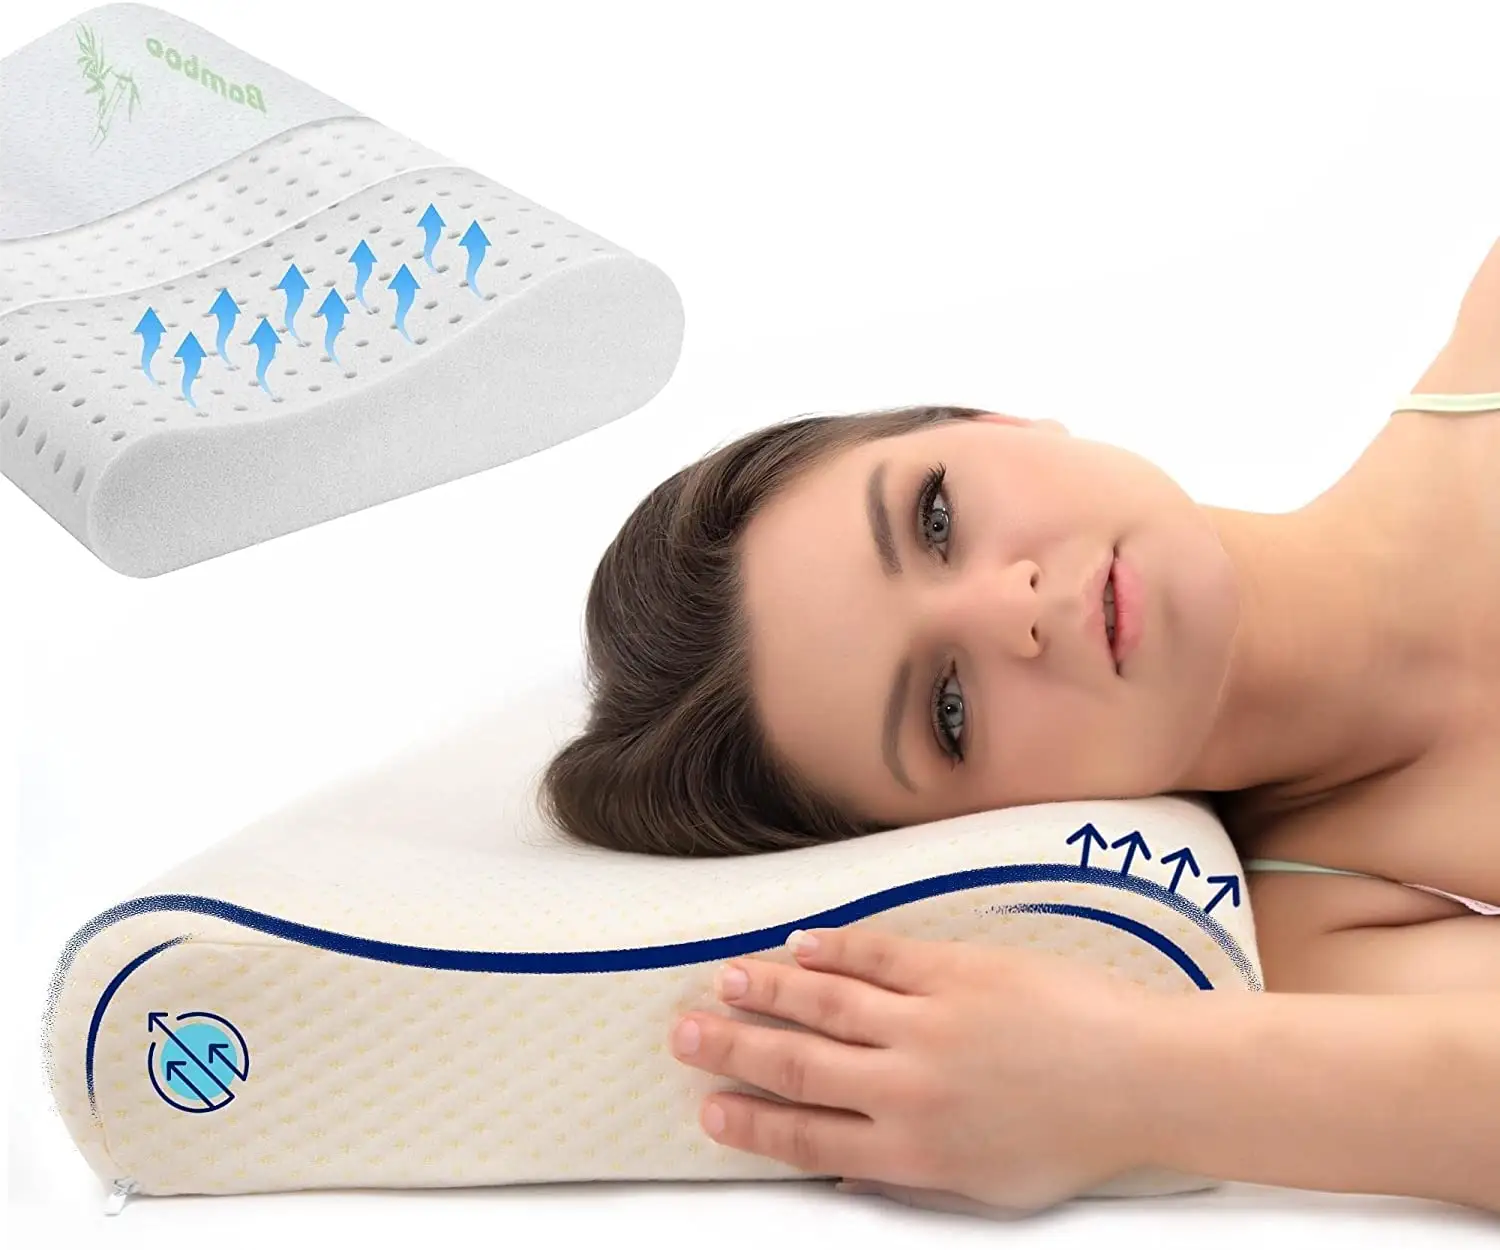 Ergonomic Cervical Support Perforated Pillow Orthopedic Contour Memory Foam Pillow With Bamboo And Air Mesh Covers